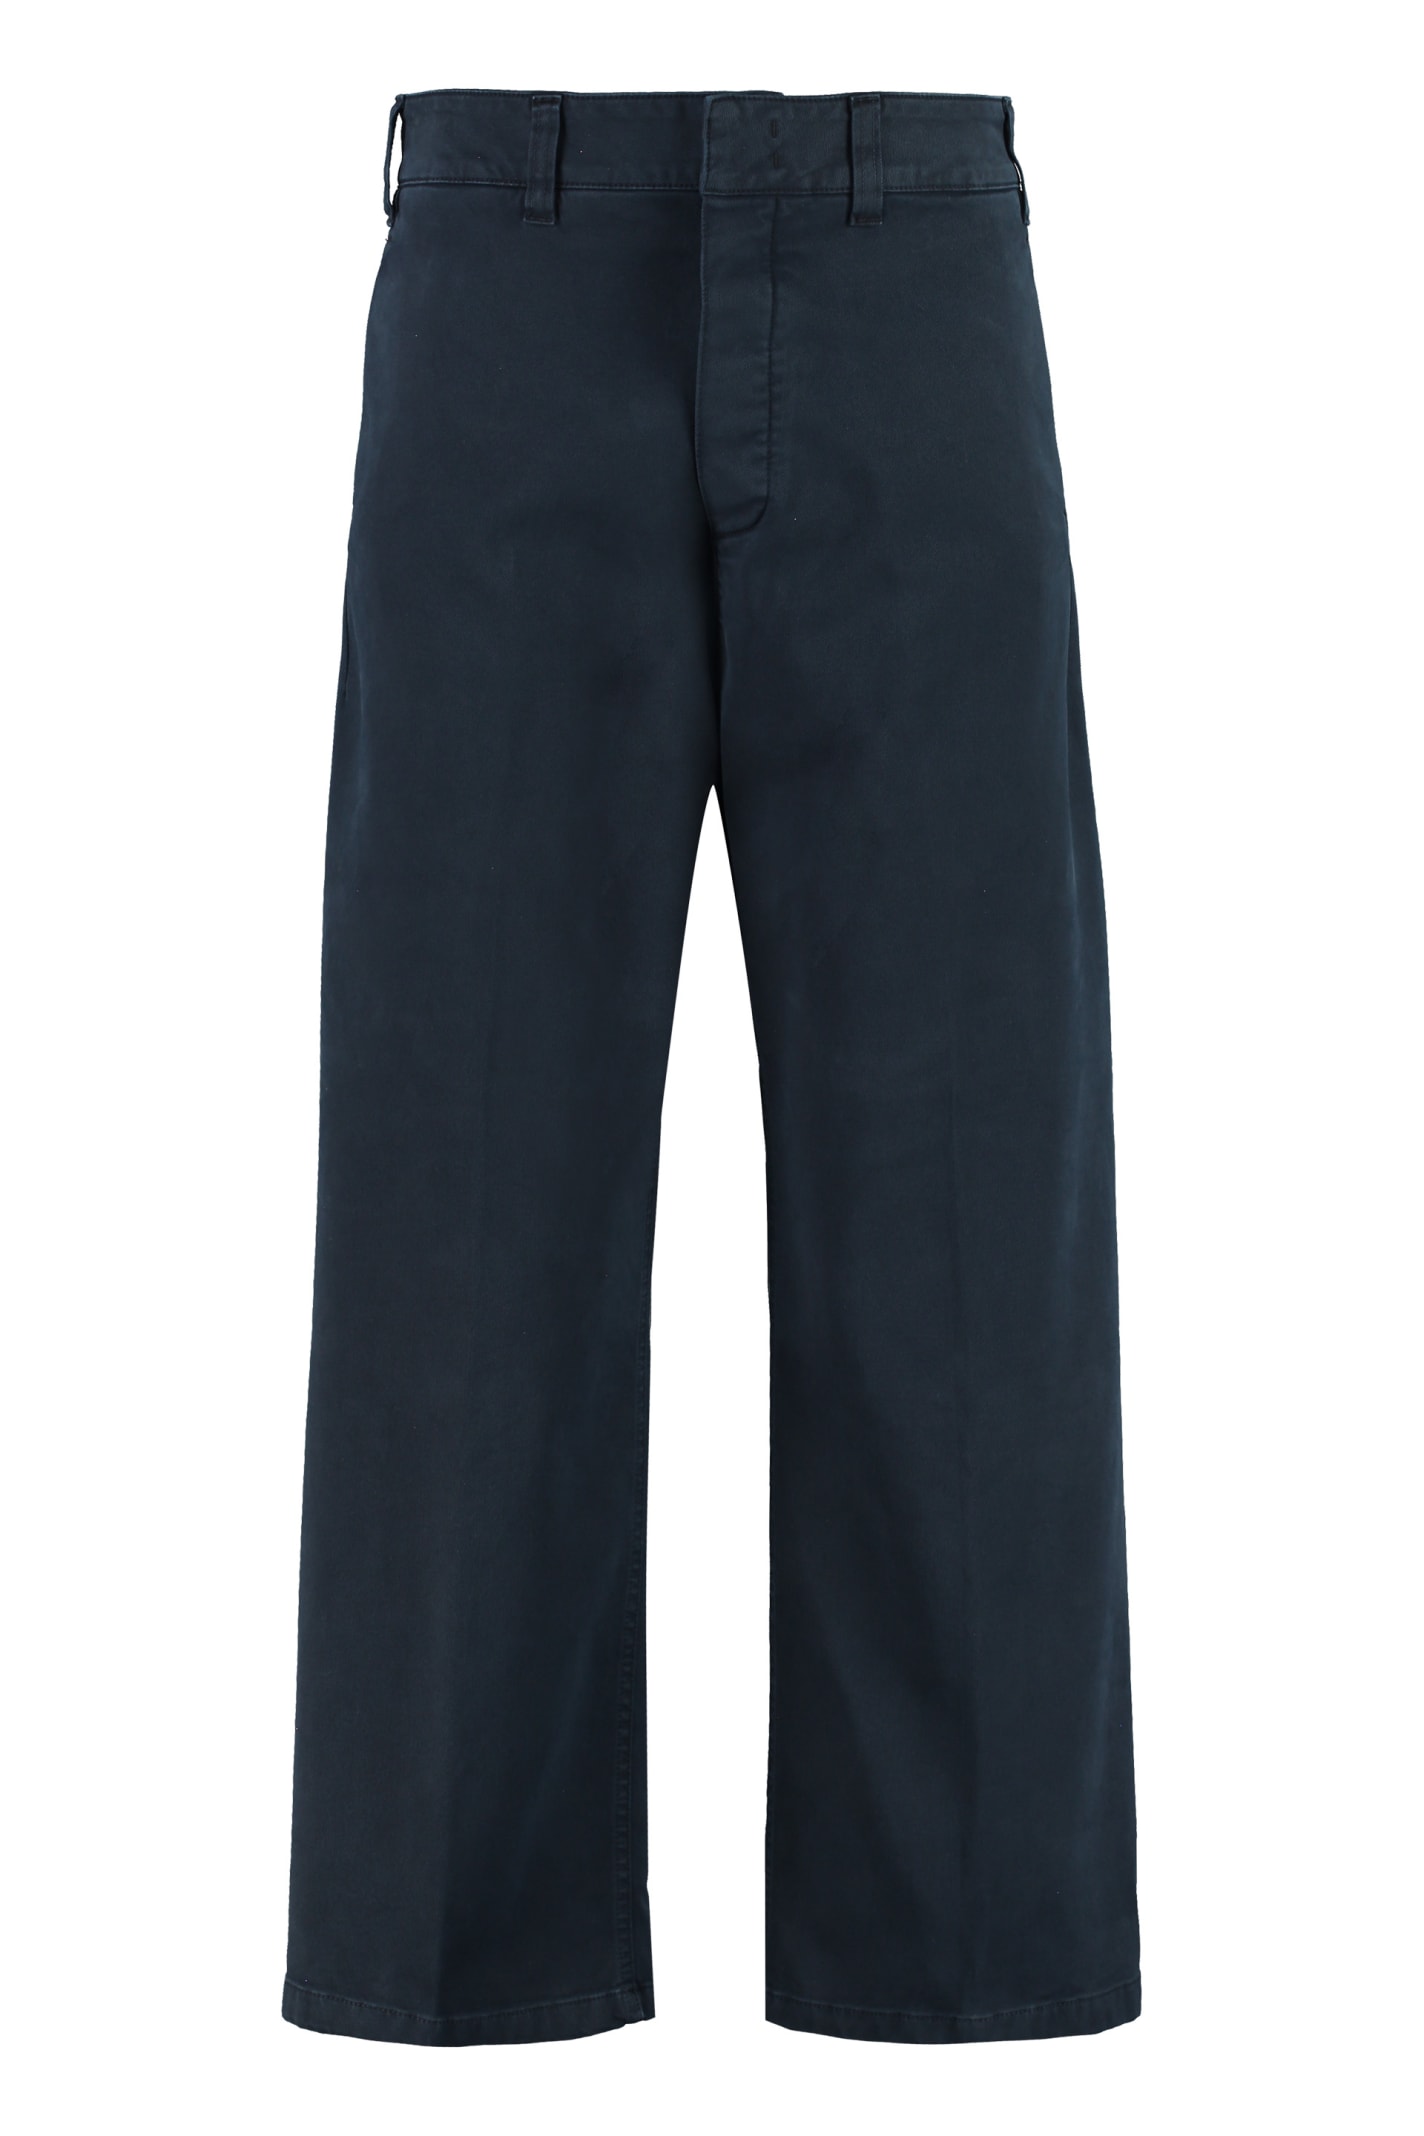 Department Five Stretch Cotton Trousers